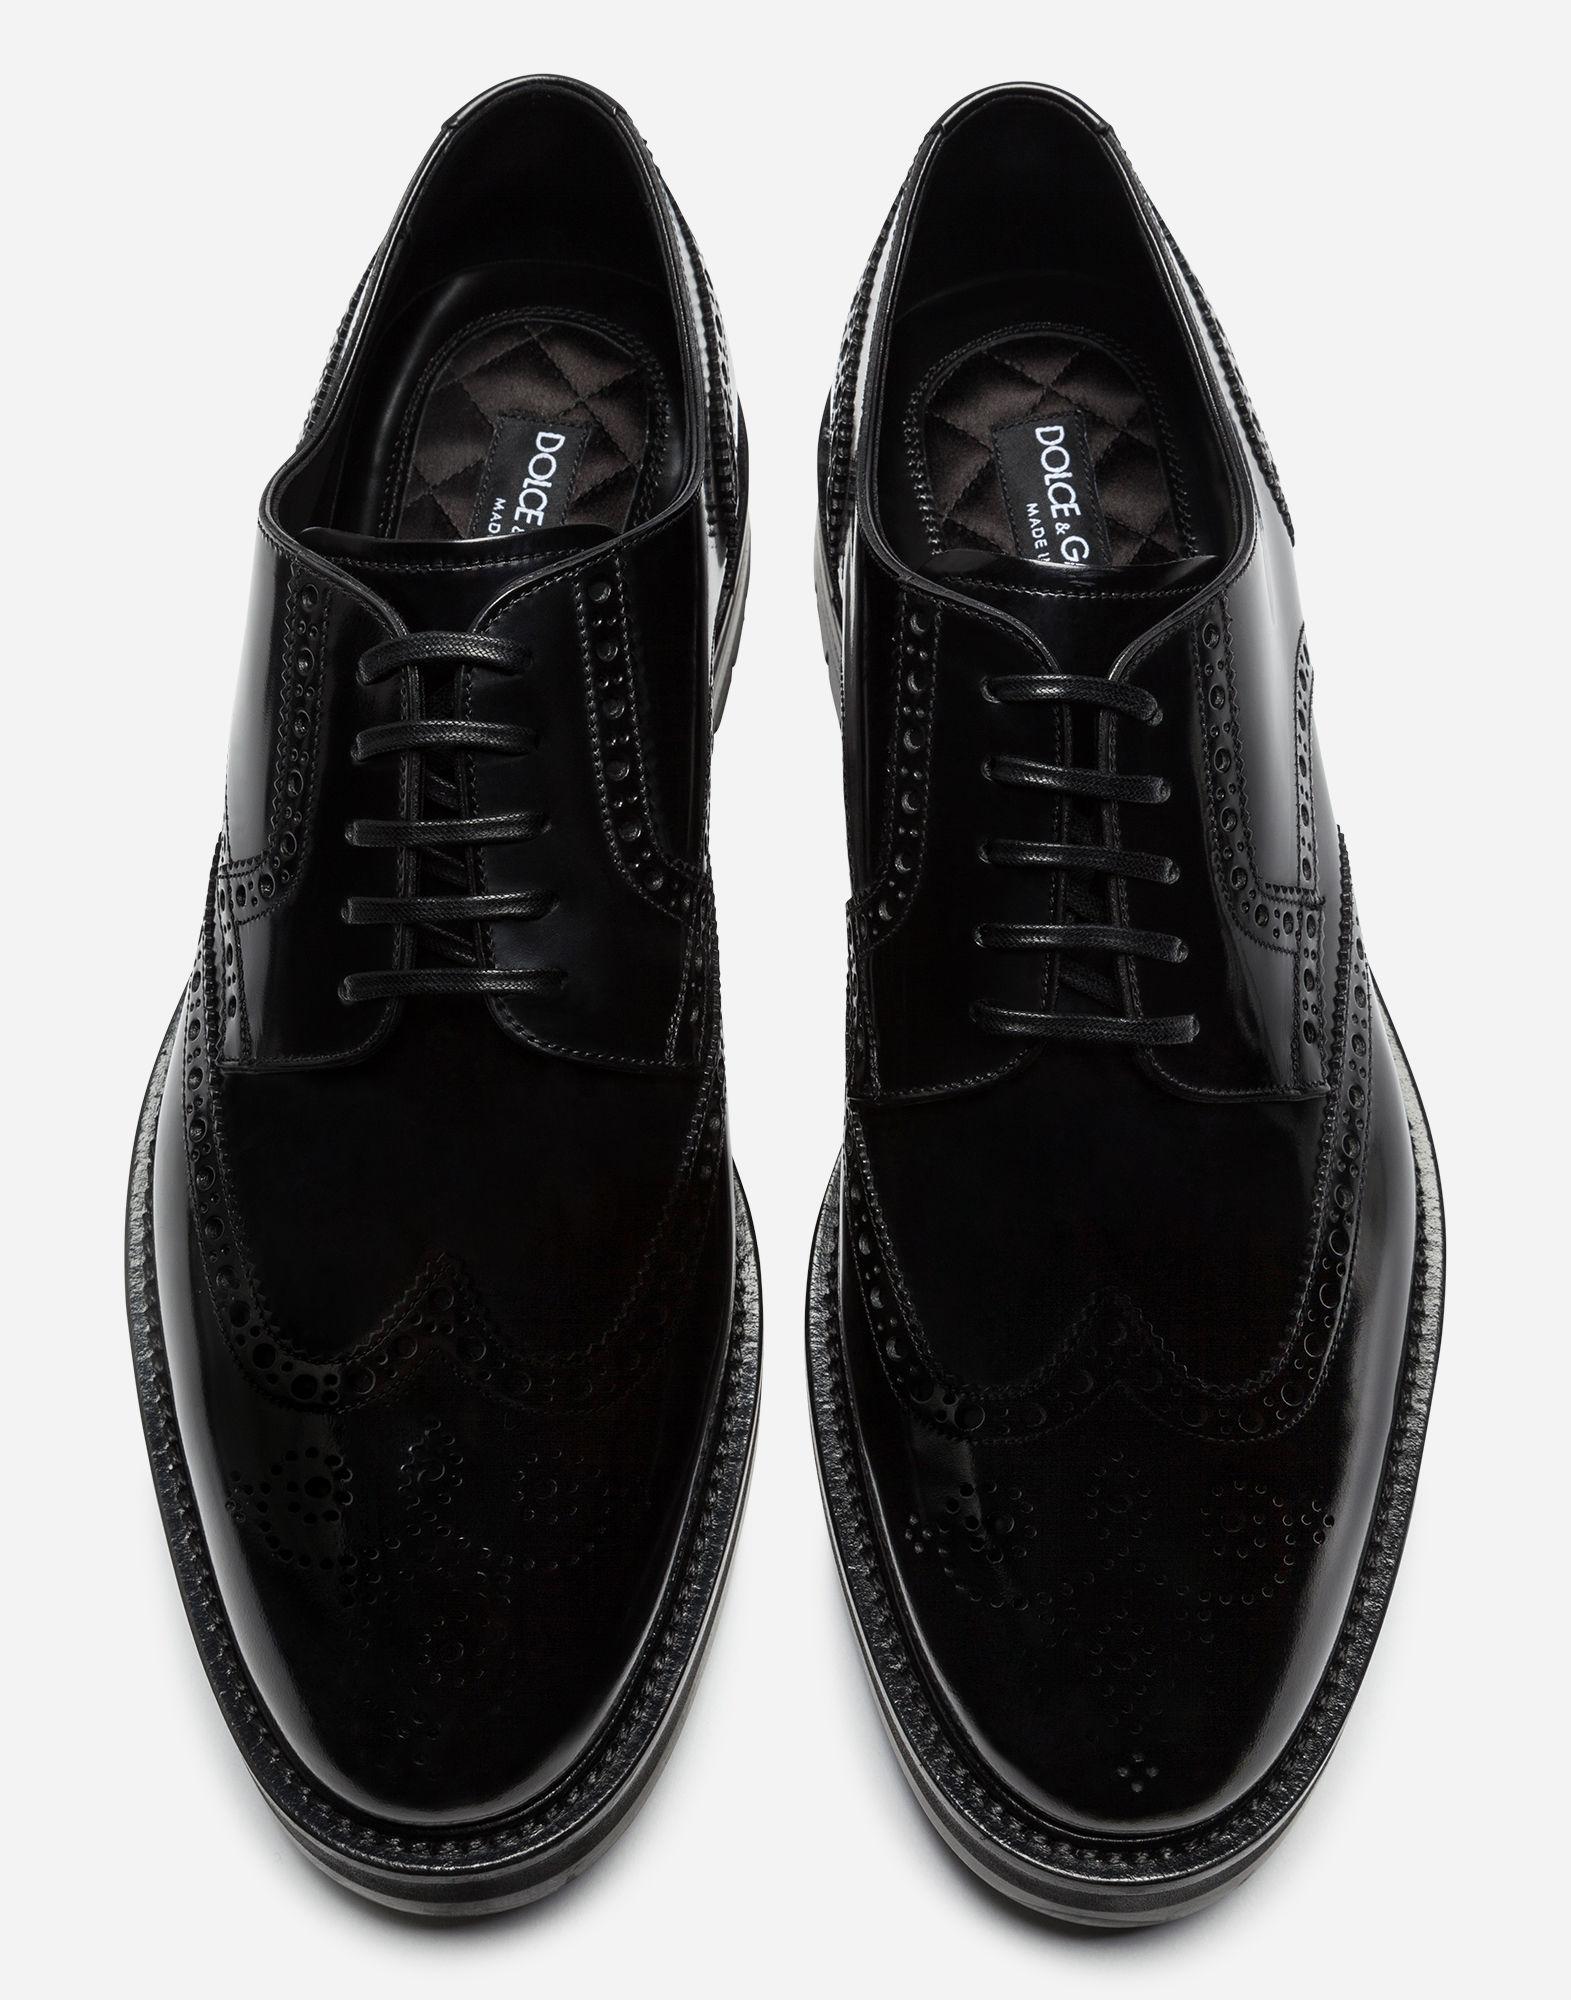 Dolce & Gabbana Full Brogue Derby Shoes In Brushed Calfskin in Black